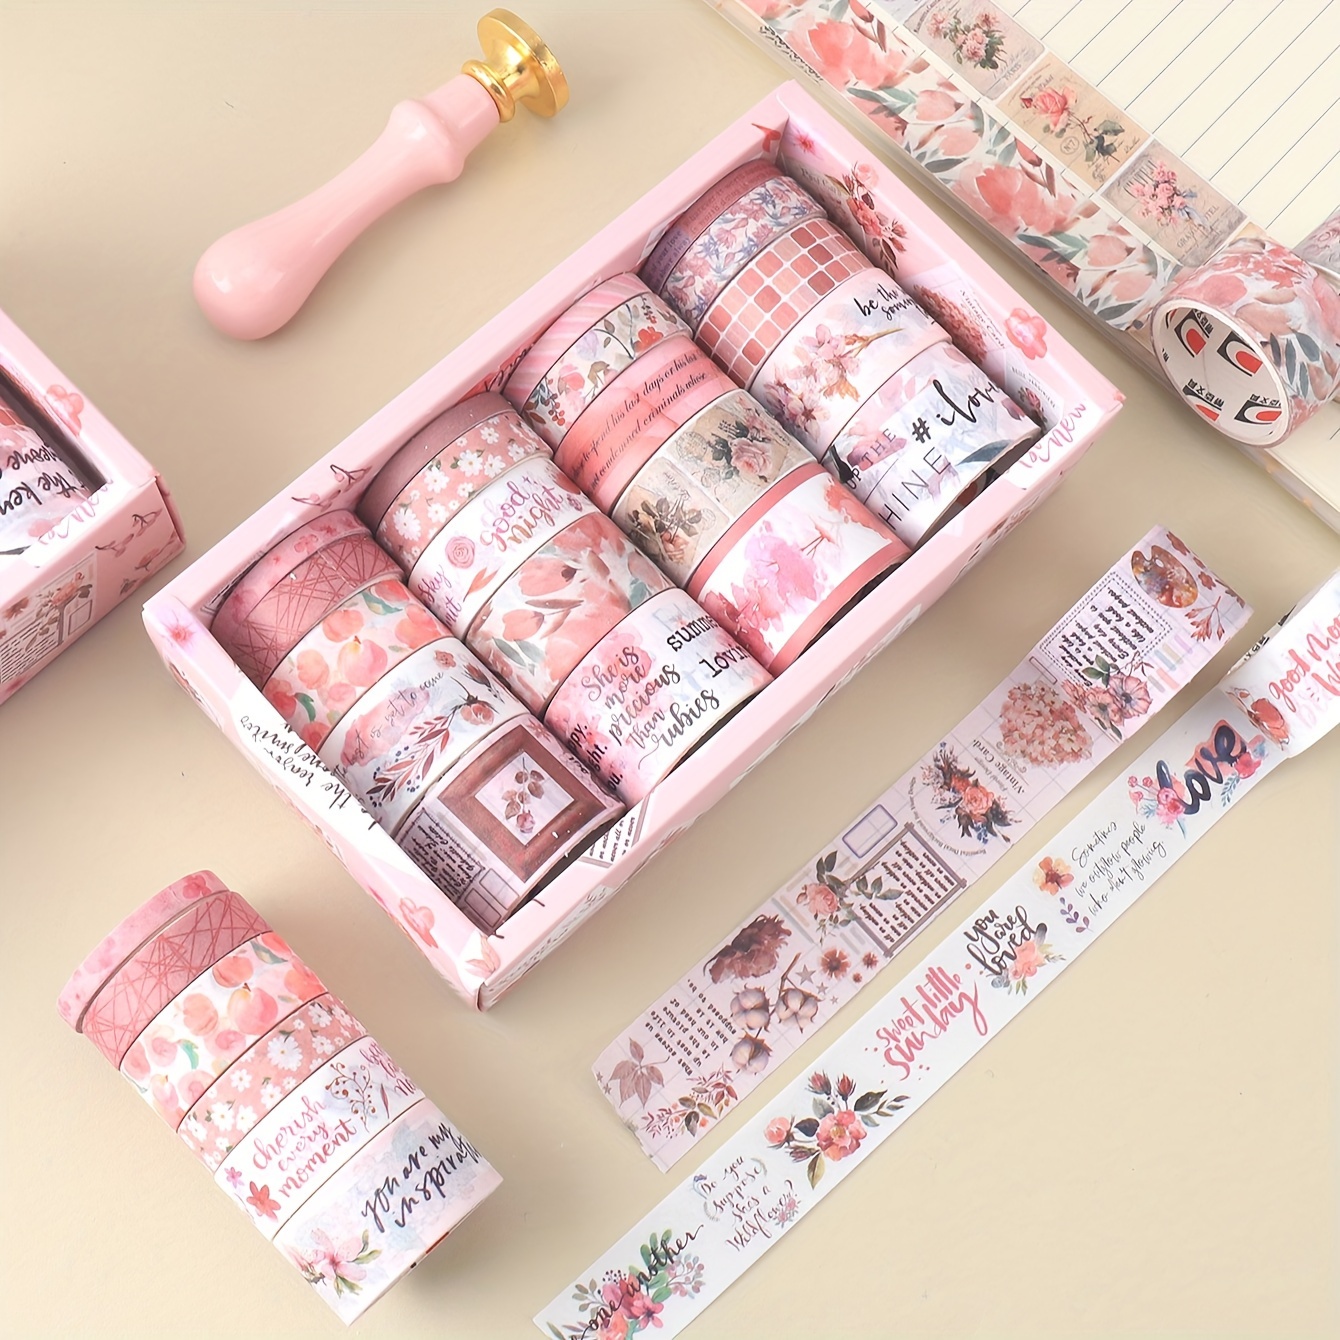 

20 Rolls Boxed Vintage Flower Plant Print Washi Tape Set, Fashion Exquisite Art Handmade Diy Decoration Material Diary Tape